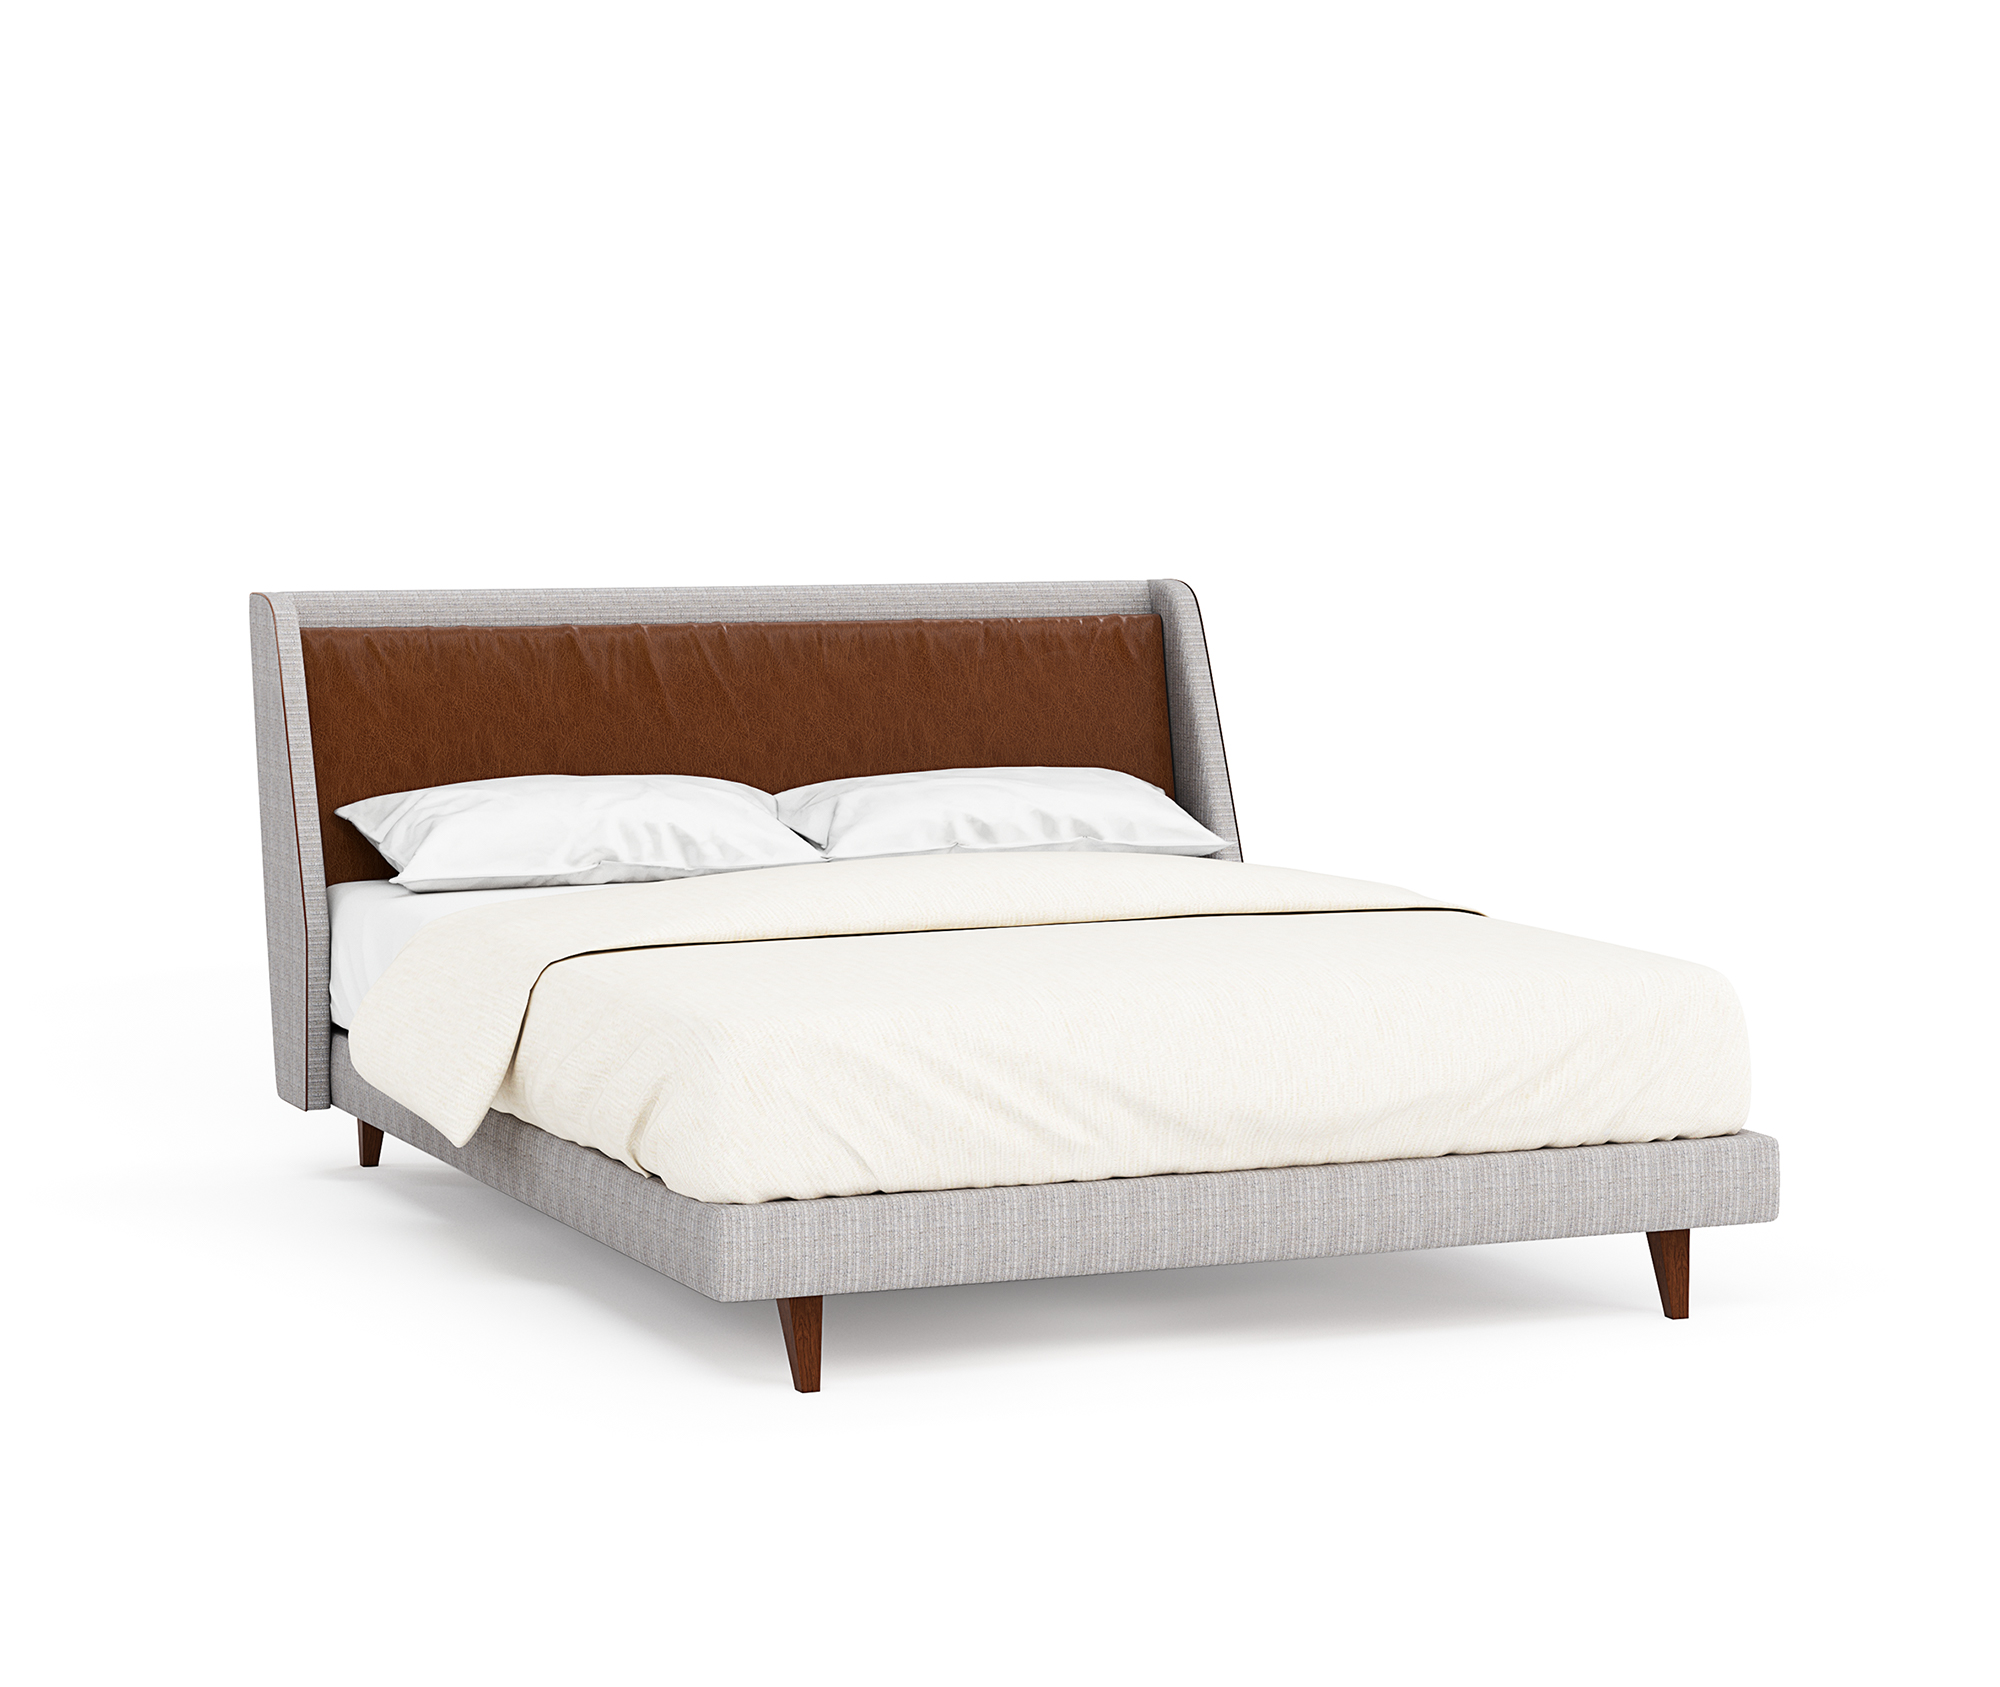 Cliff Young Ltd_Luca Bed_int_products